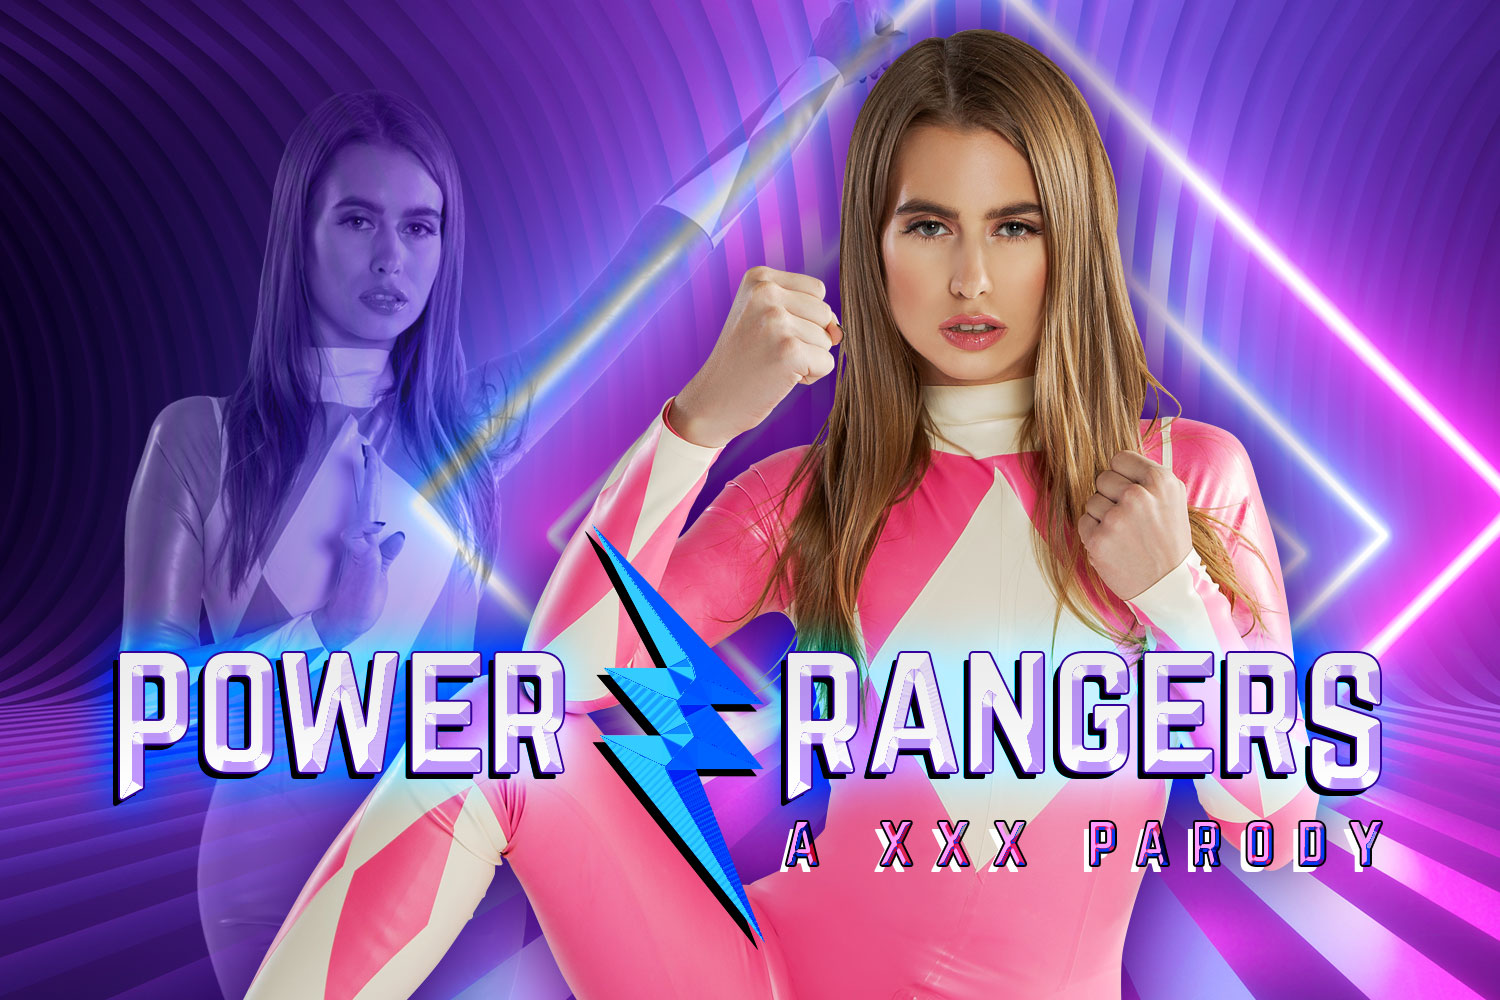 chris balagtas recommends Power Rangers Porn Video